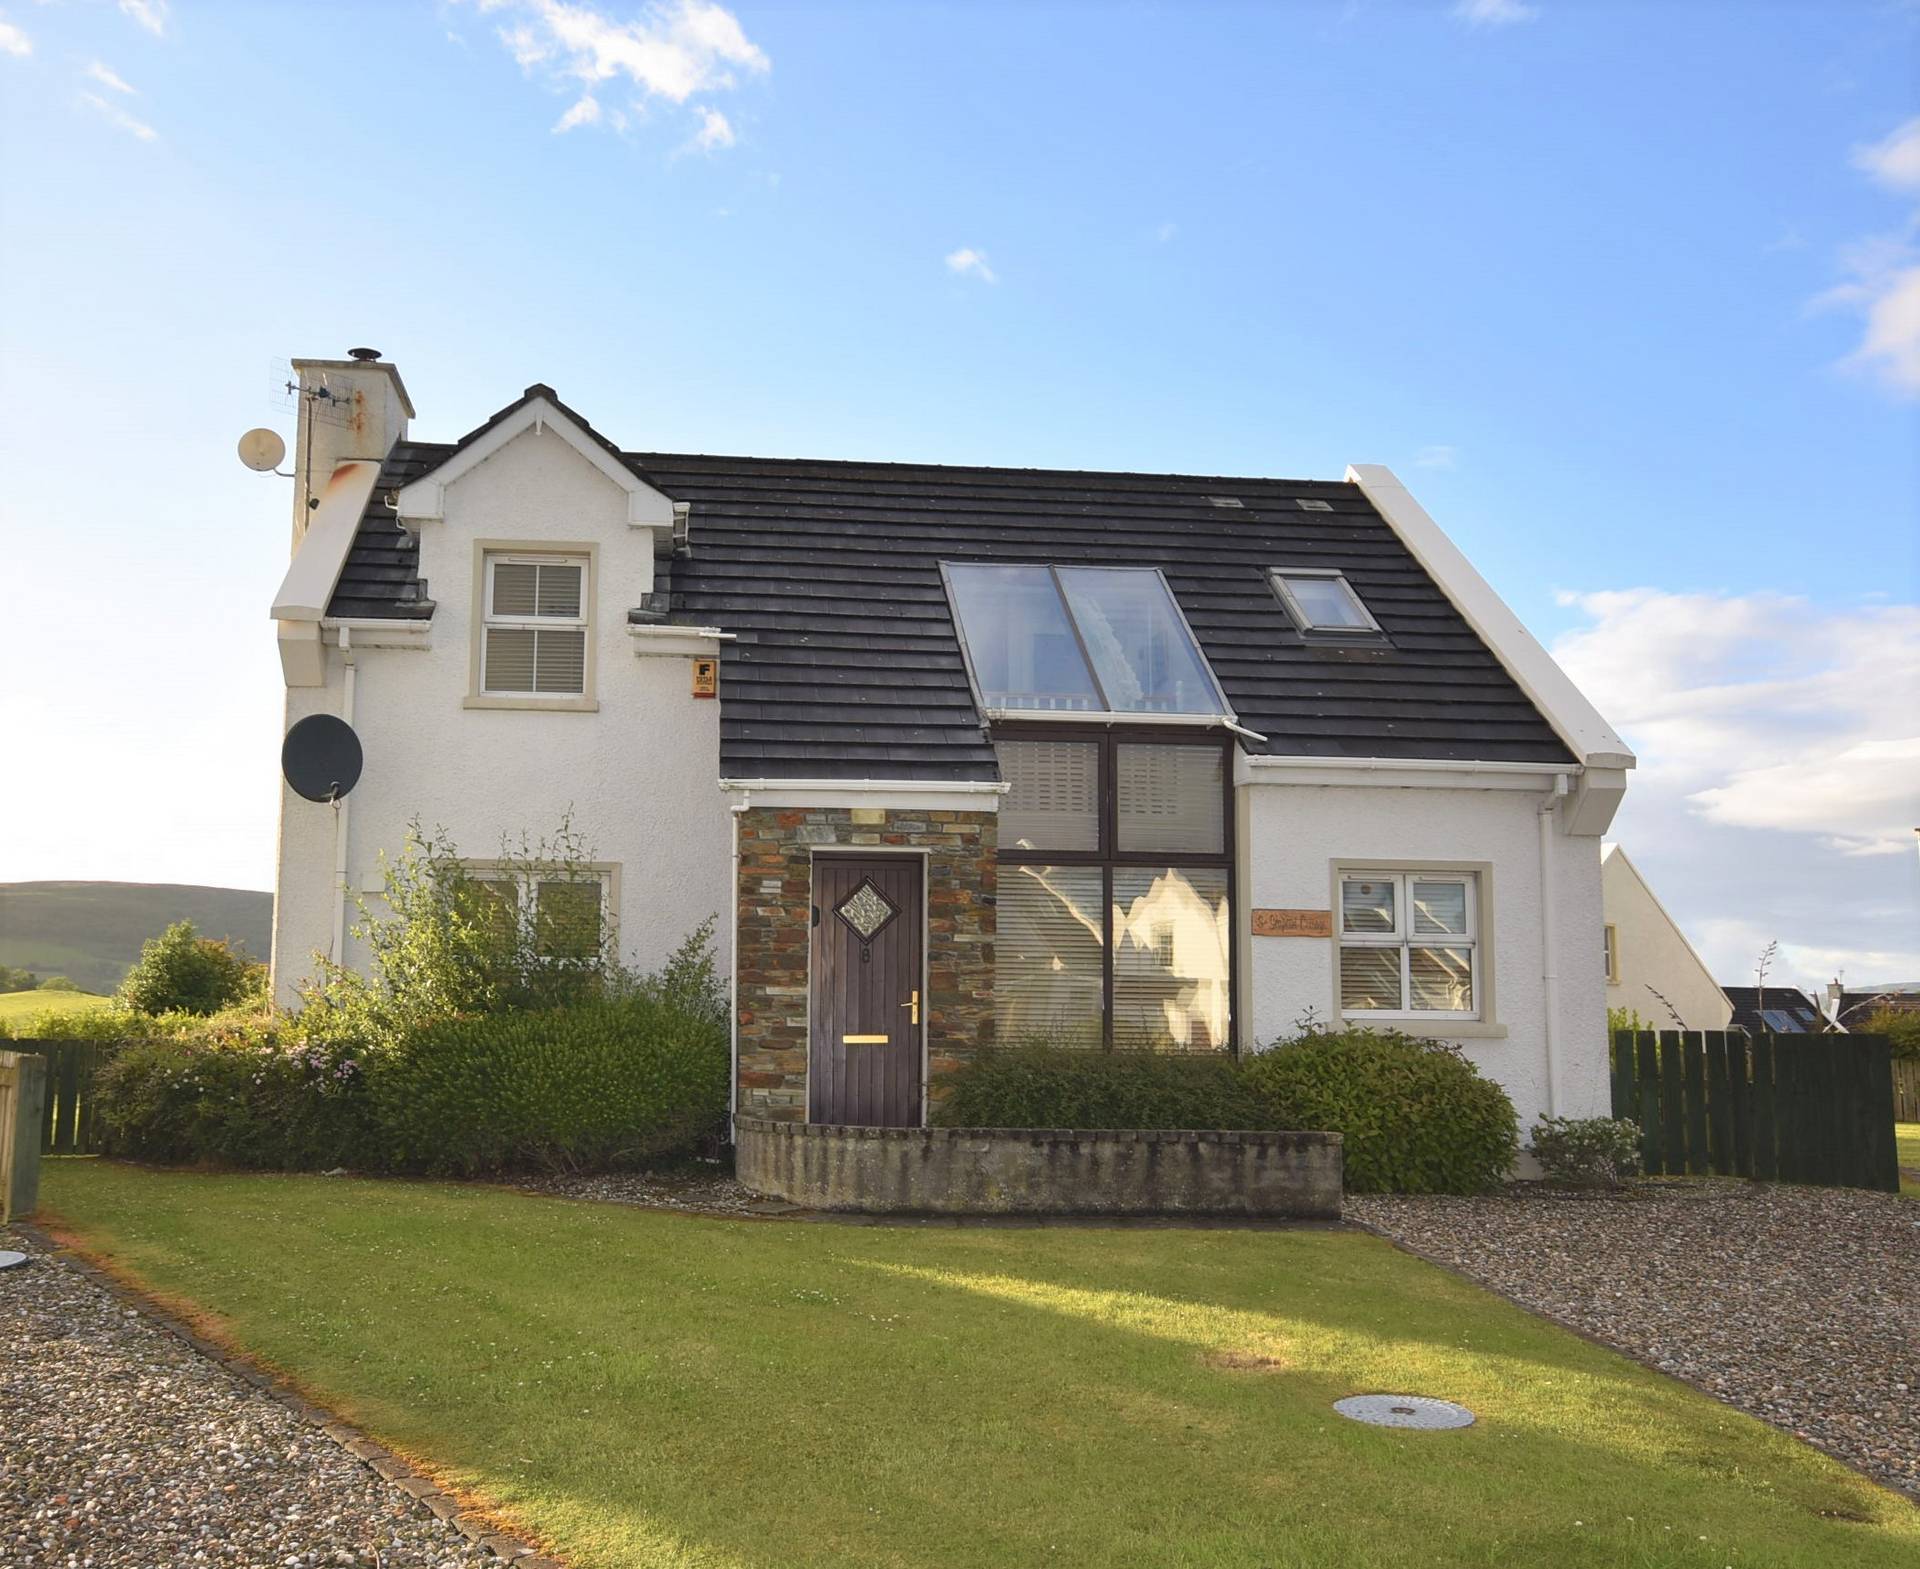 “Seapoint Cottage”, 8 Clearwaters, Rathmullan, Co. Donegal, F92 TW71